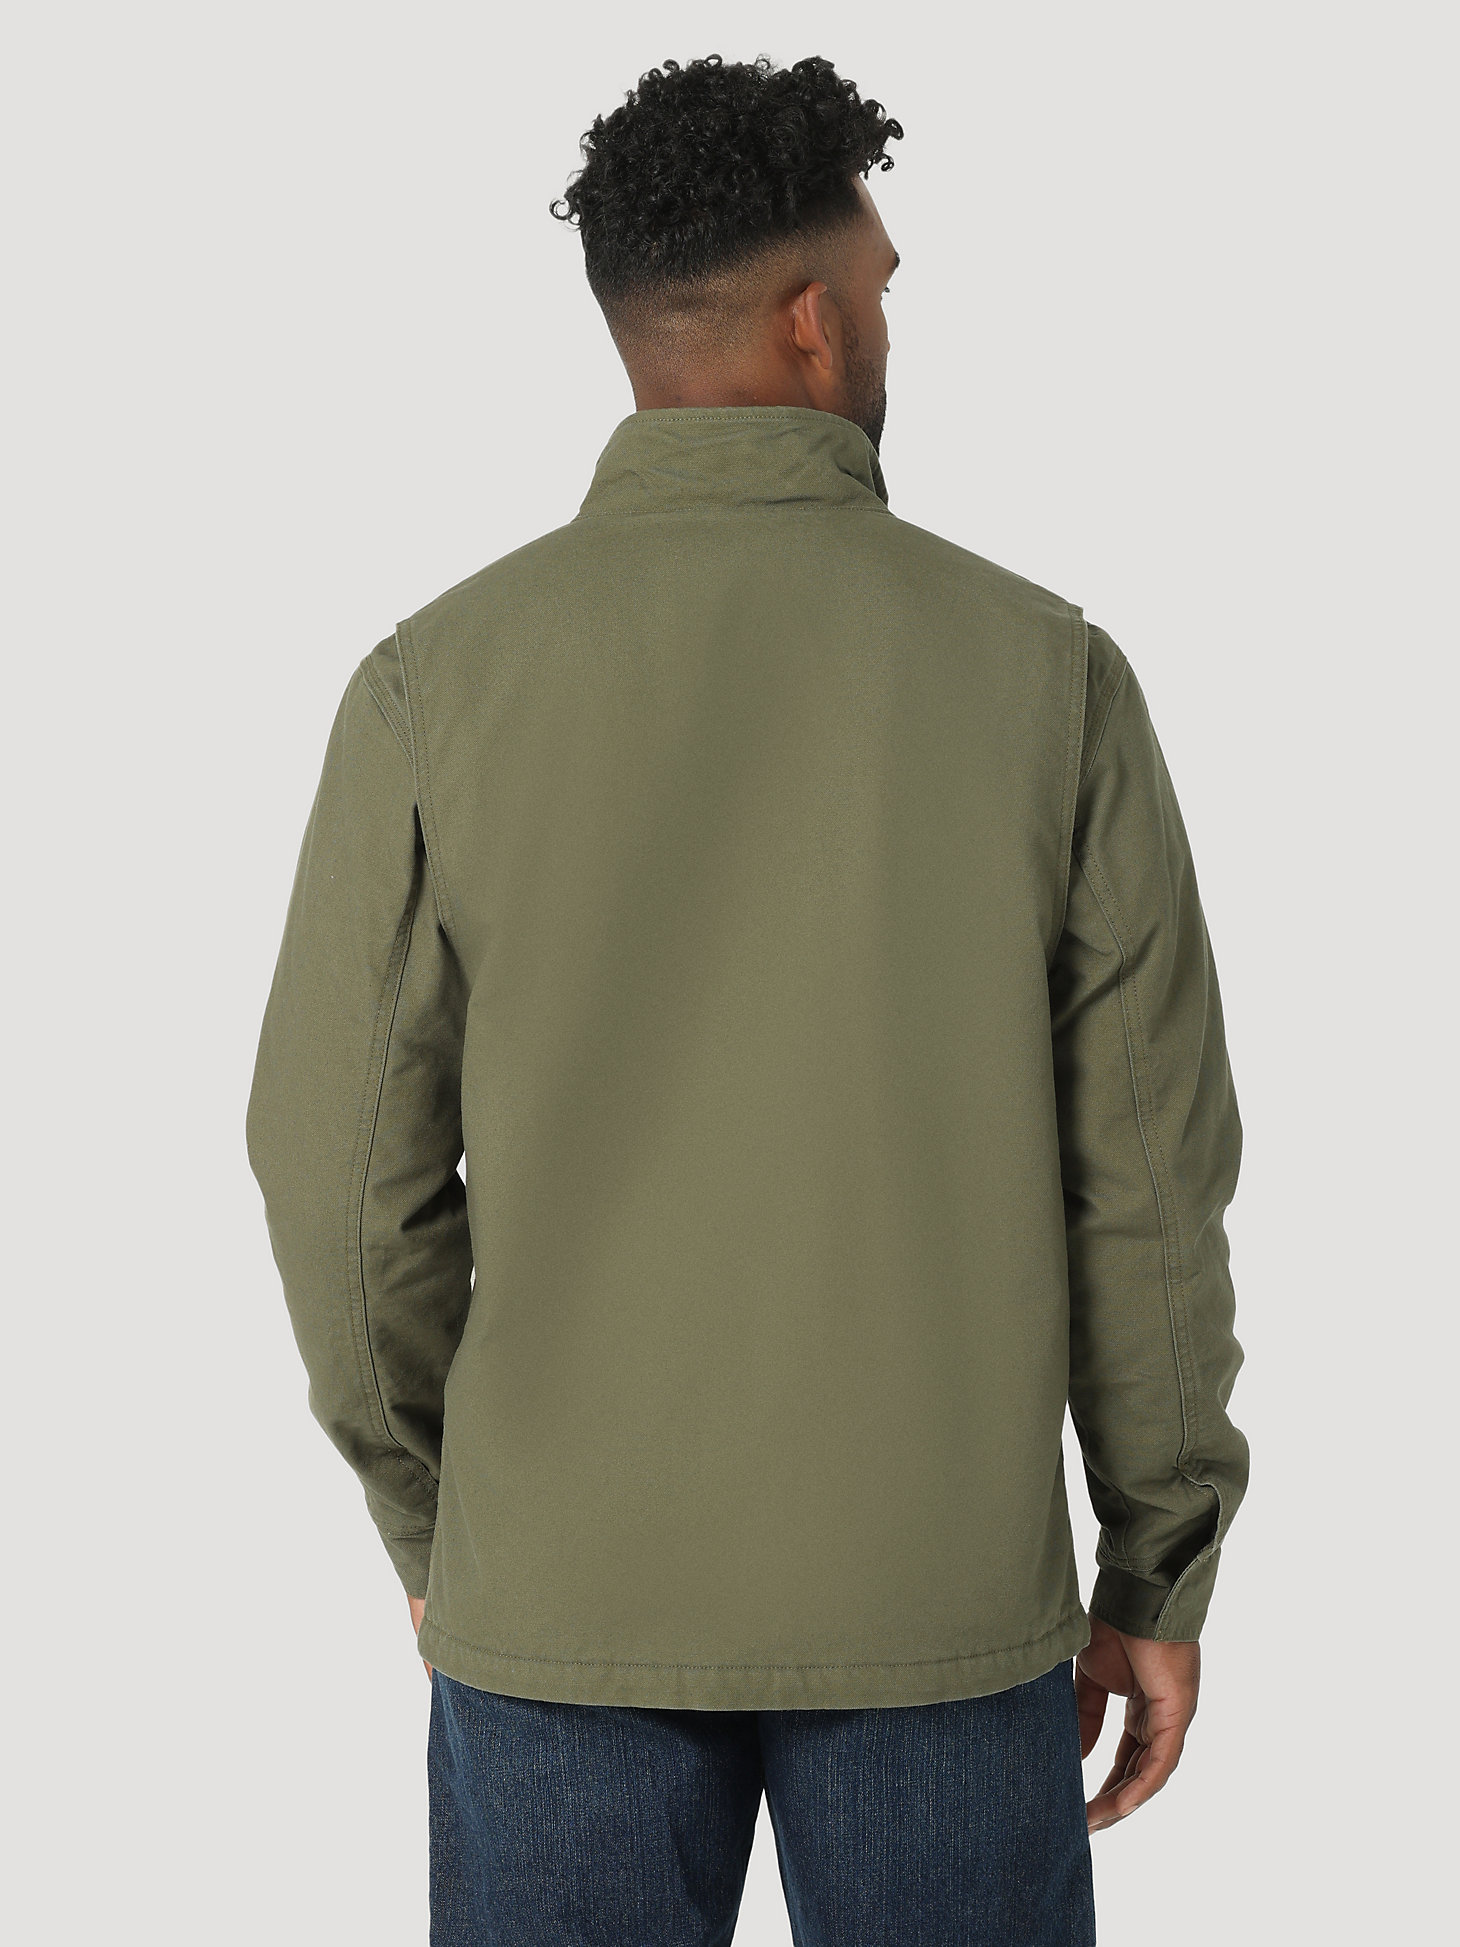 RIGGS Tough Layers Sherpa Lined Canvas Jacket in Loden alternative view 3